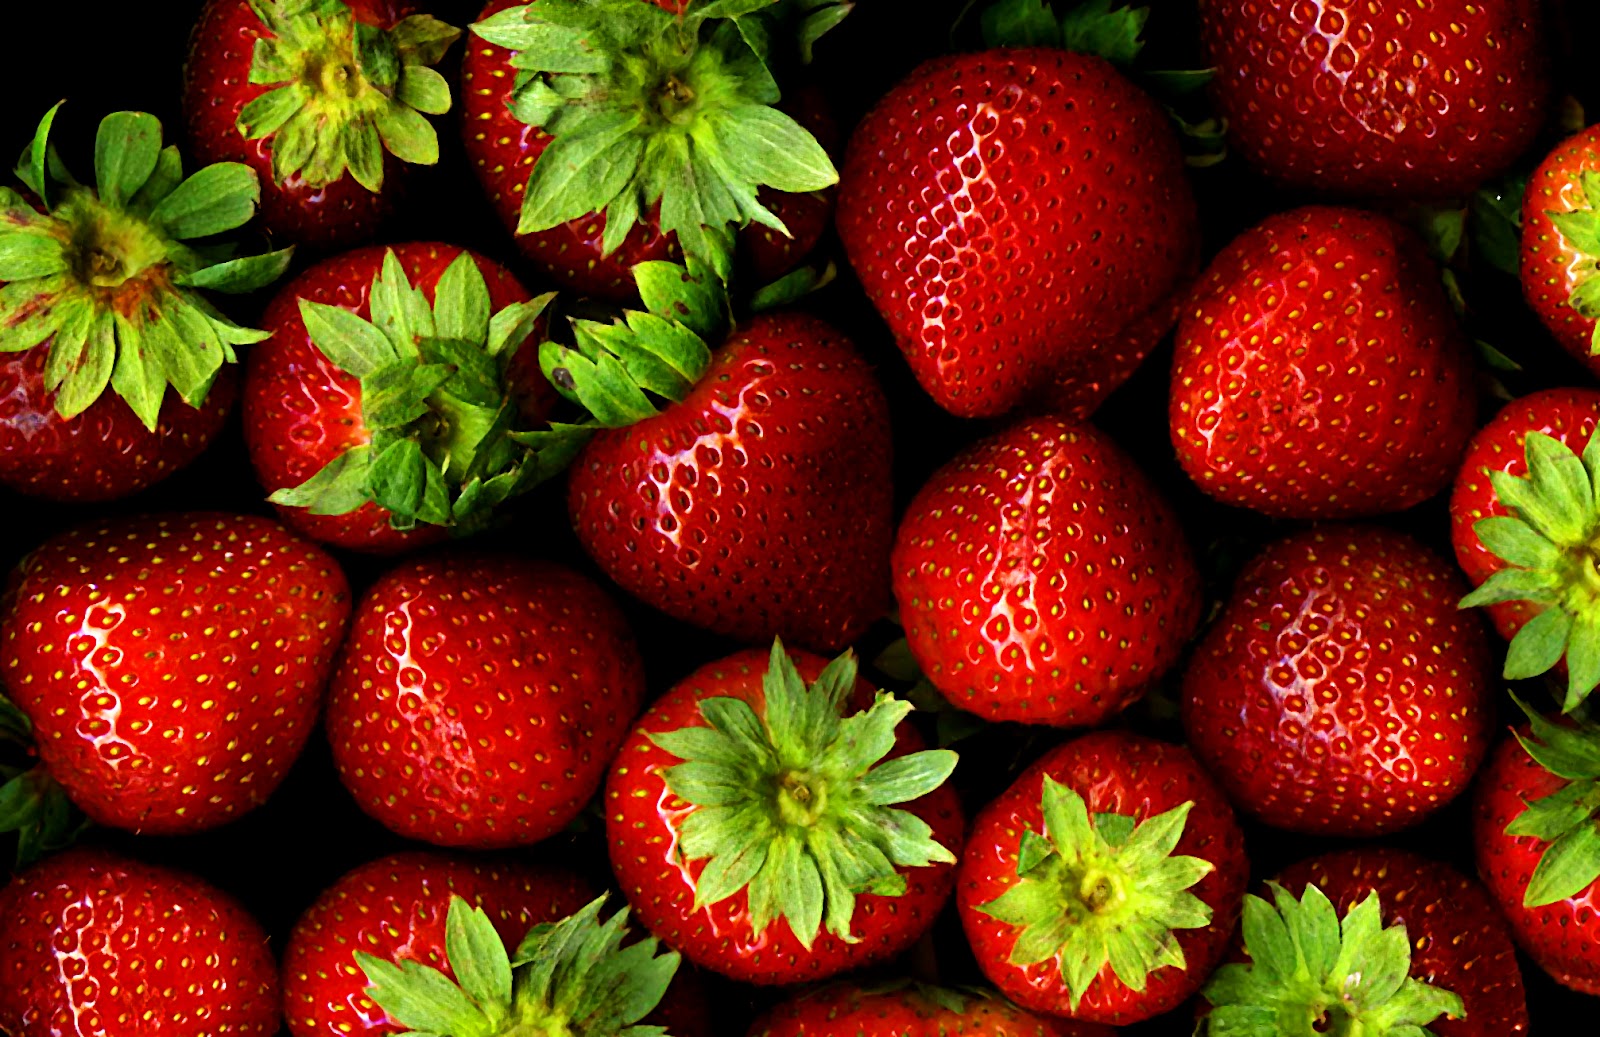 File:Strawberries with hulls